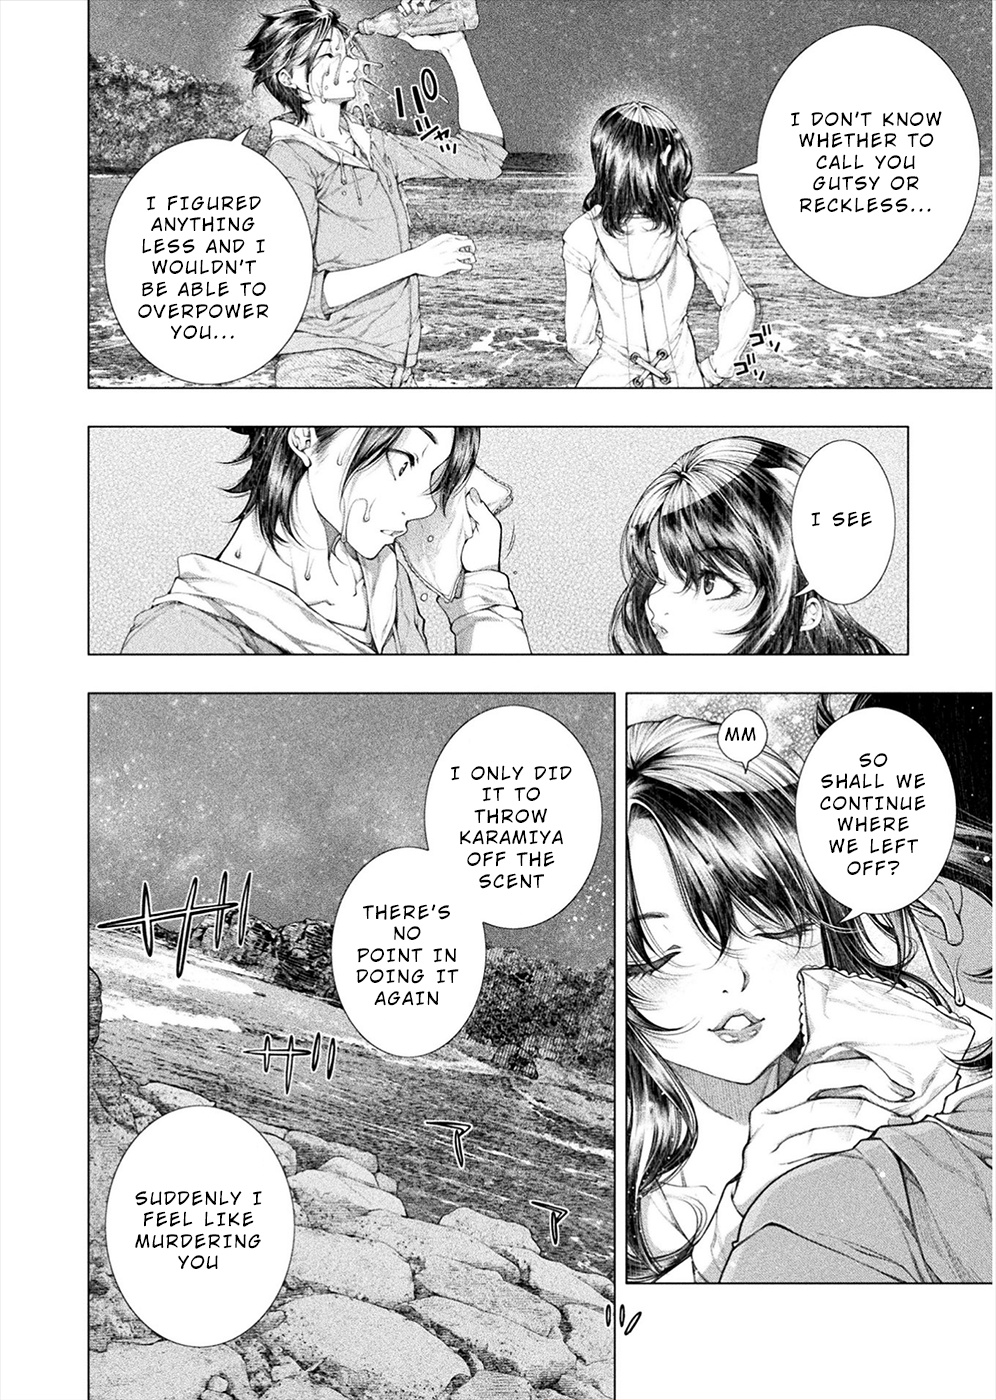 Lovetrap Island - Passion In Distant Lands - - Page 2